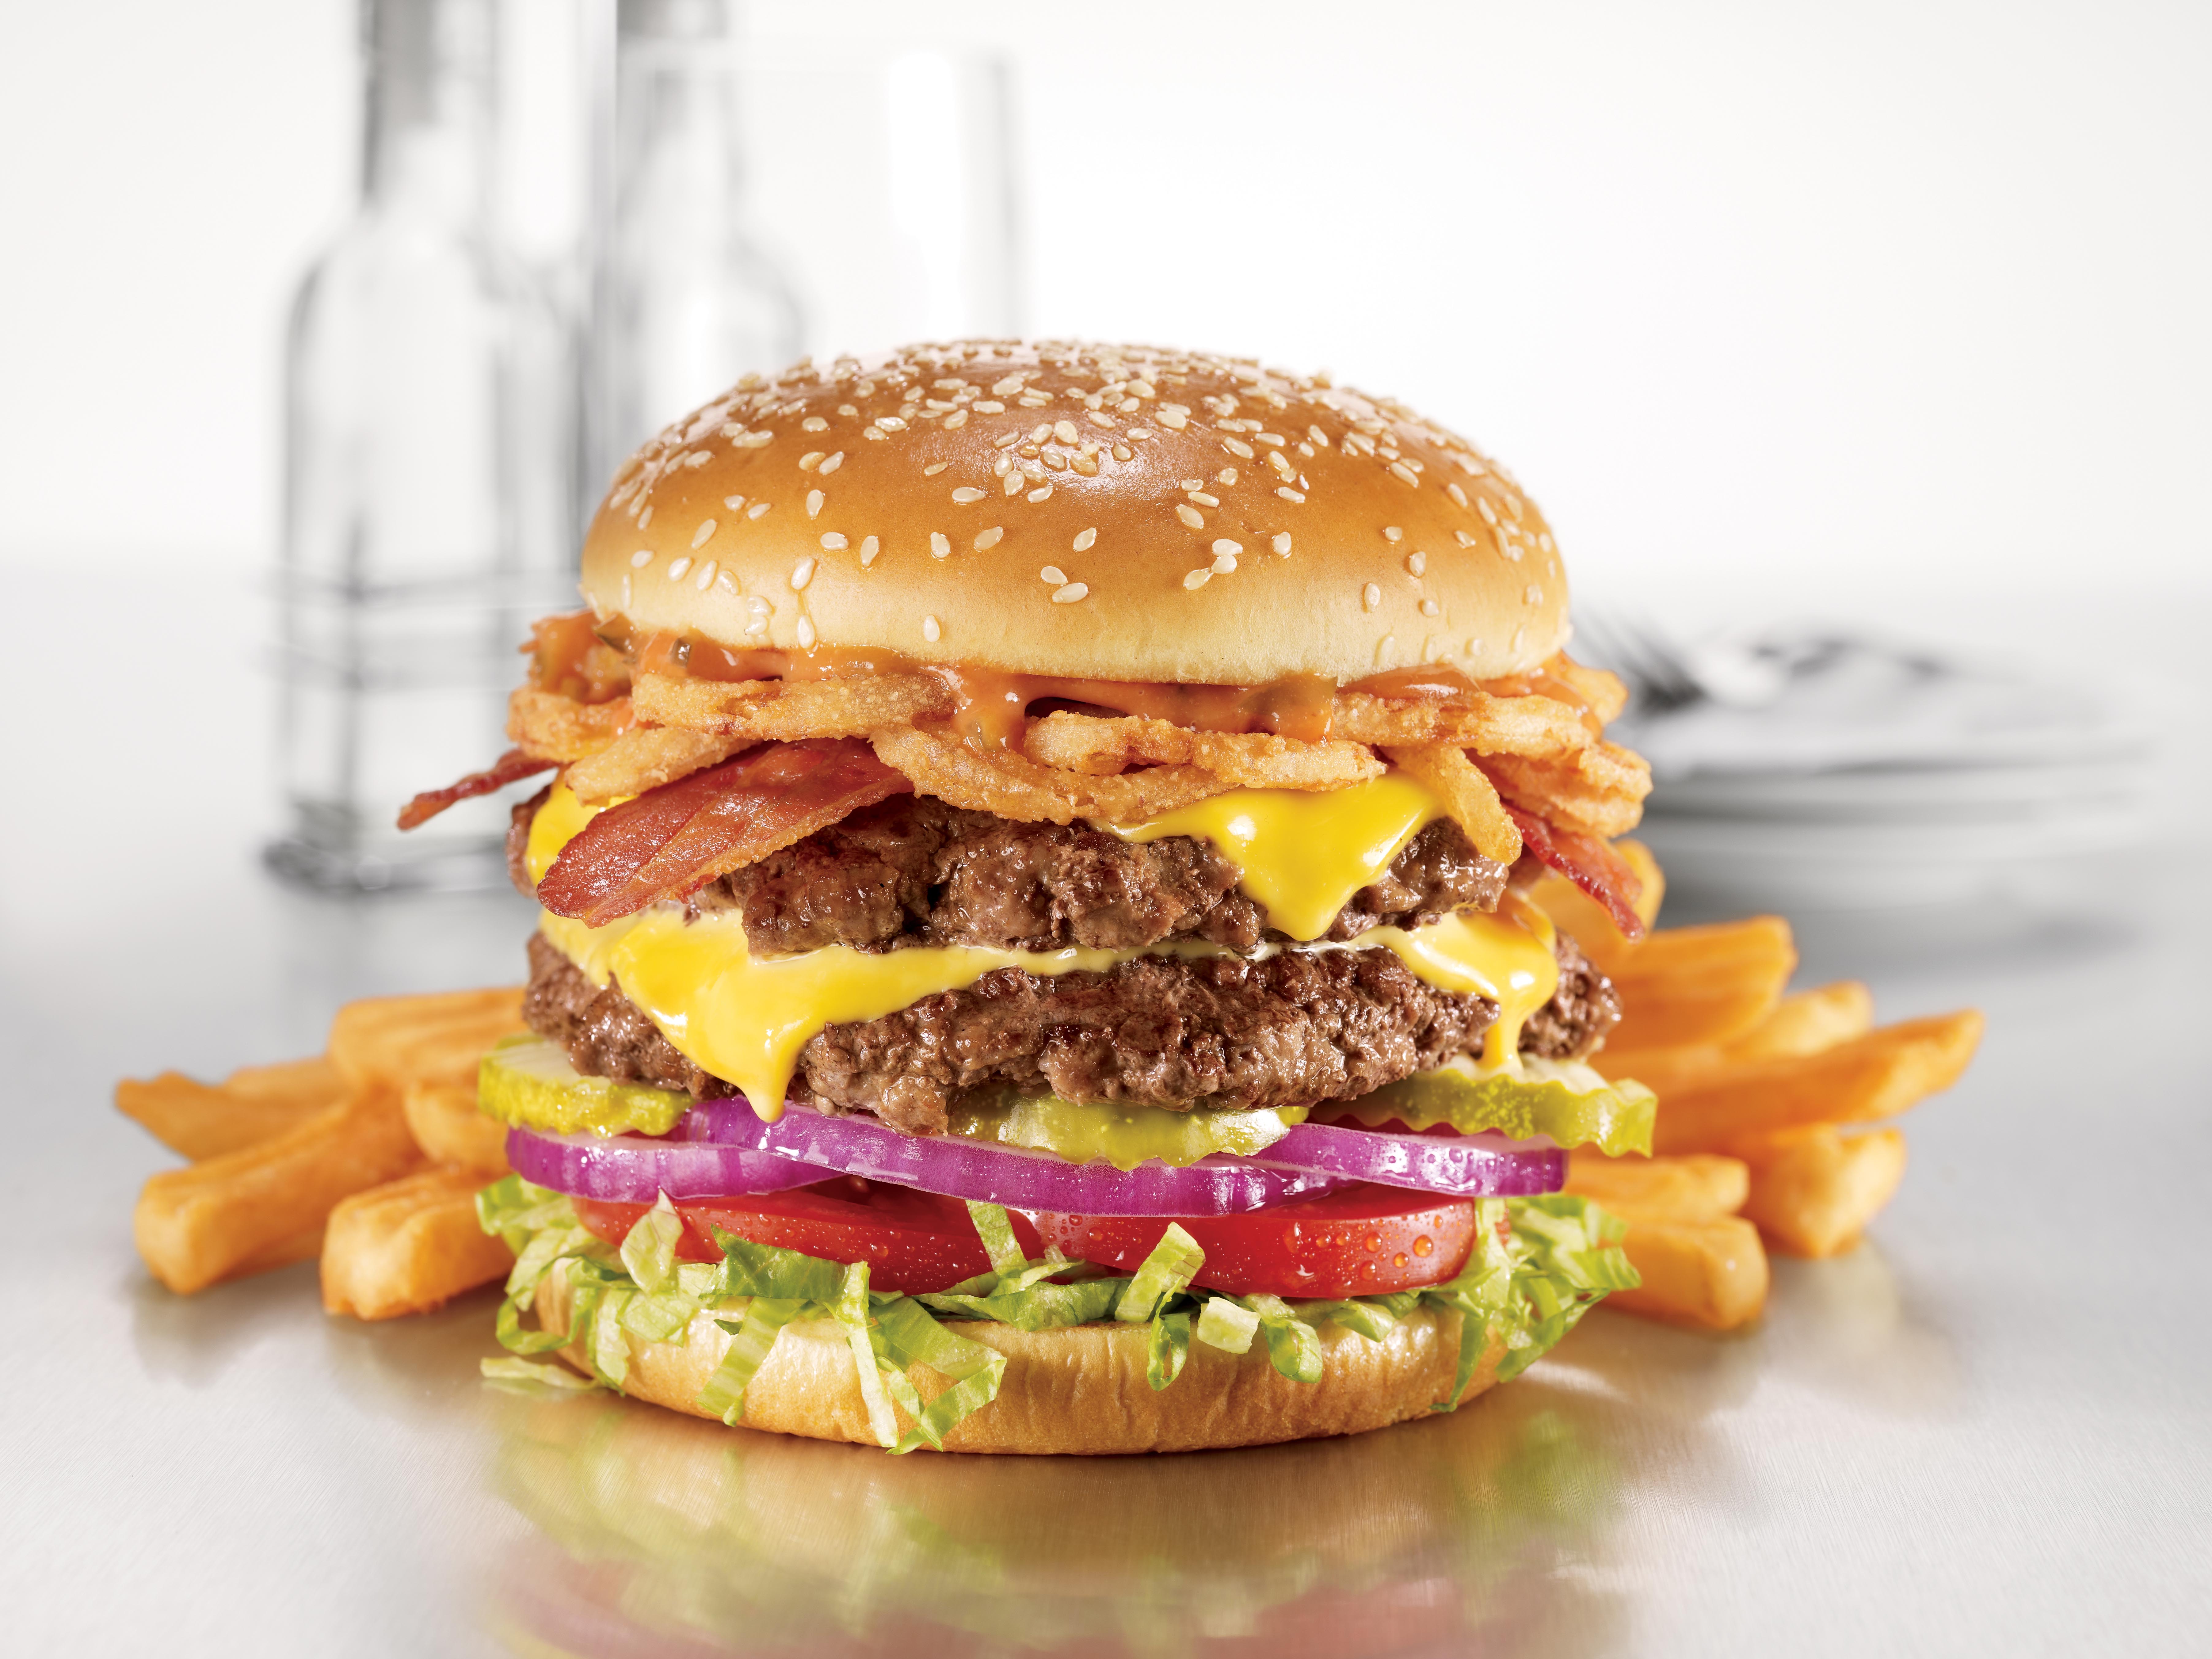 starshapes:  petehix:  chrisdemaraisofficial:  transposing:  milkti:  lidstrom:  pyreclaws:  masato-indou:  whittacker:  39 mega pixel photo of a burger   I can see the goddamn cell walls in the onion holy fucking shit   wait a sec is that      a hair